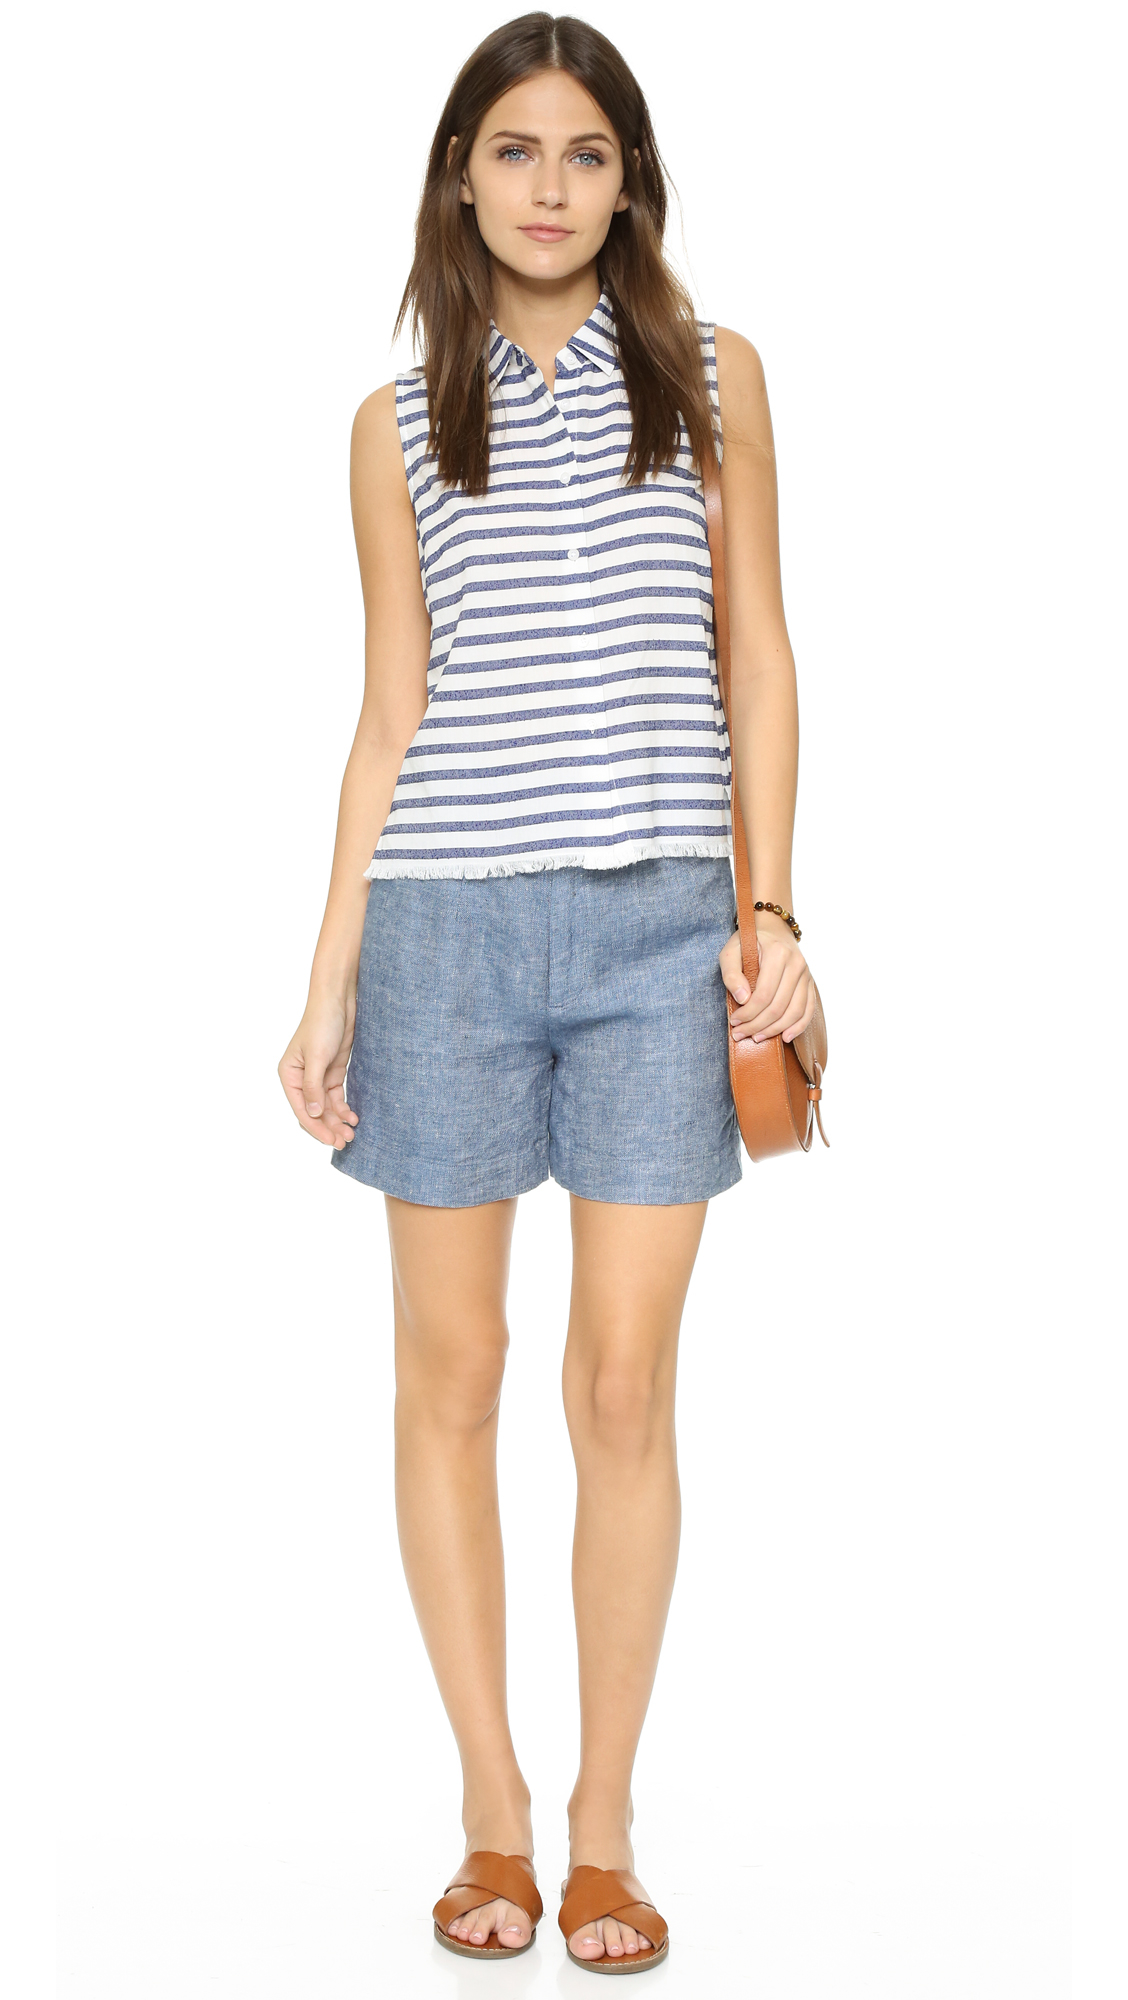 Plymouth baby tee madewell dress women clothing online boutiques